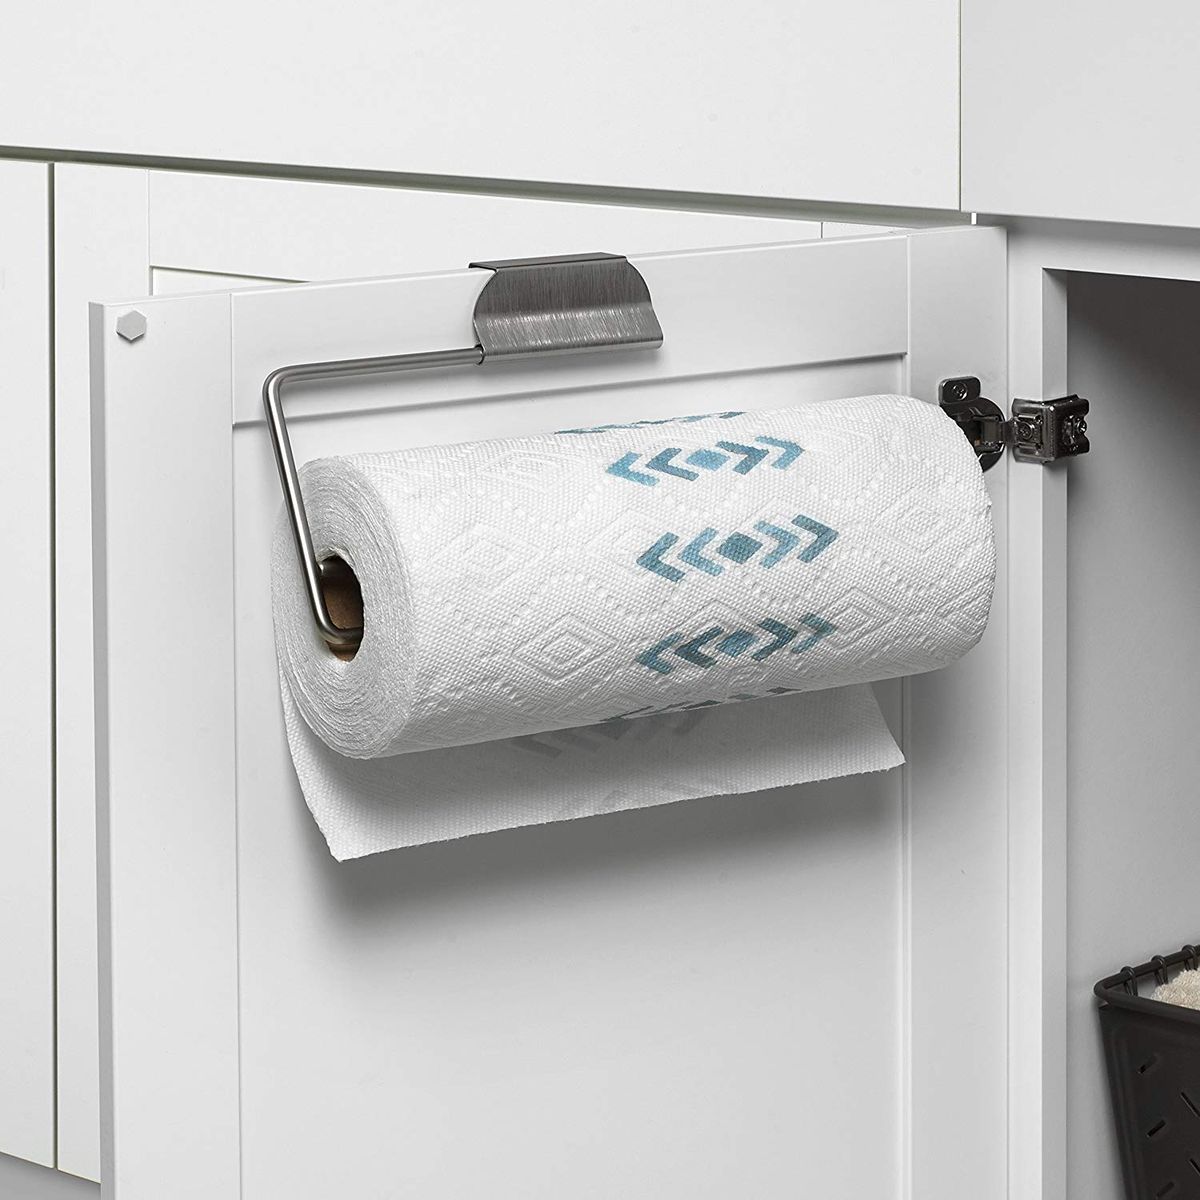 Commercial Paper Hand Towel Dispenser,Wall-Mounted Bathroom Paper Towel Dispenser Tissues Box Holder Hand Towel Dispenser White Paper Towel Dispenser 